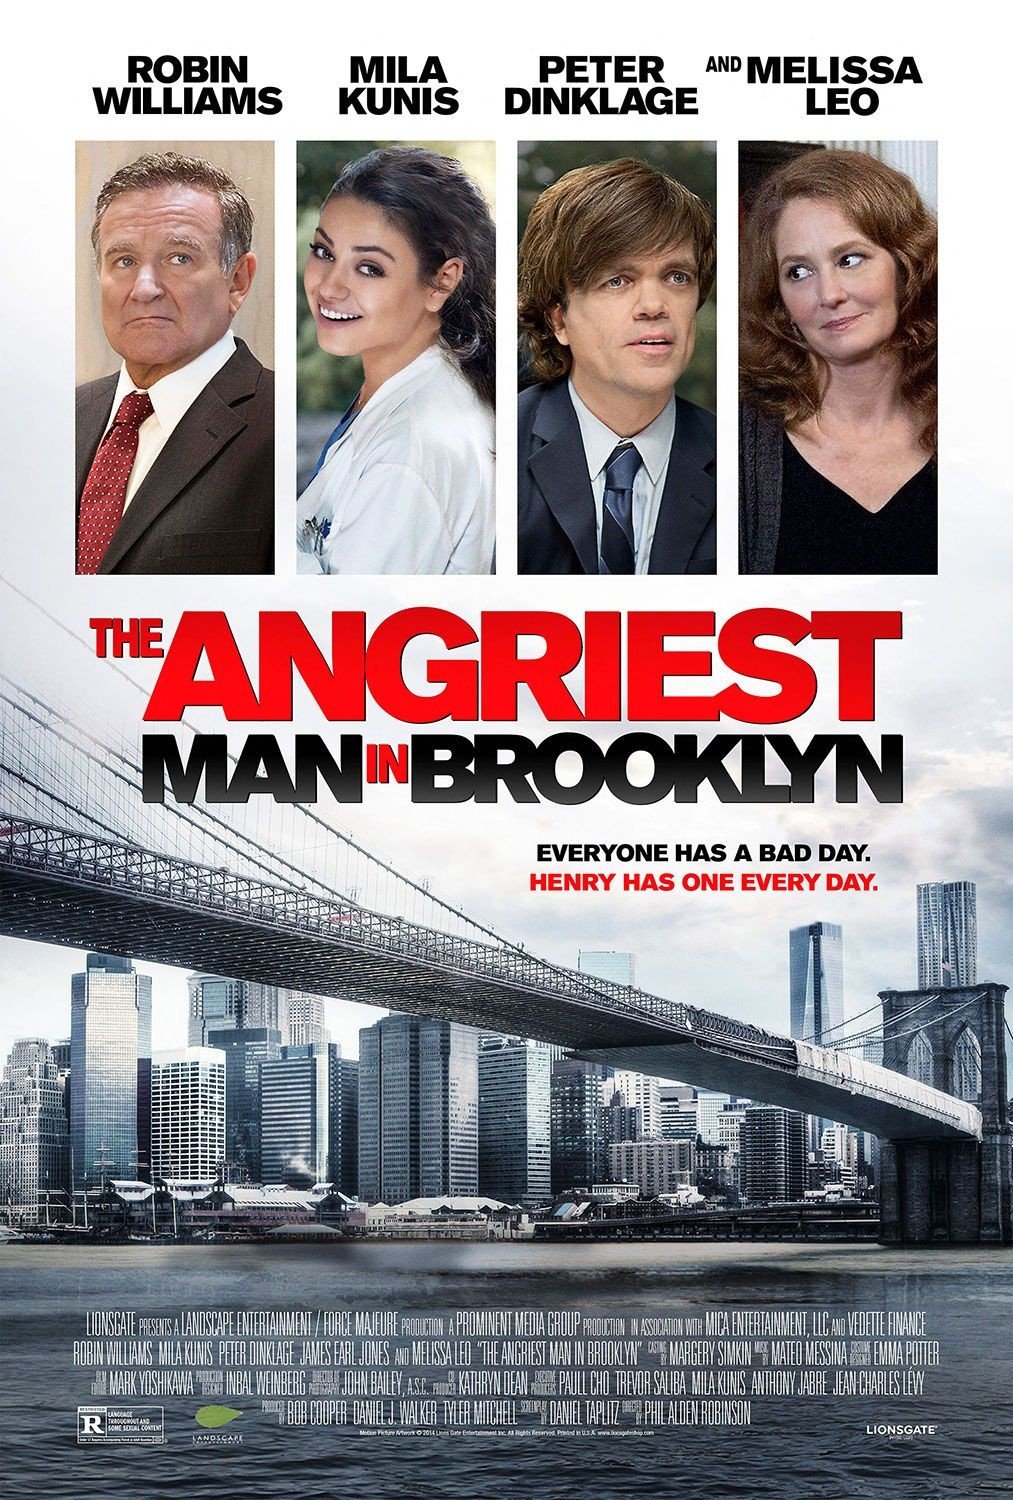 L'affiche du film The Angriest Man in Brooklyn